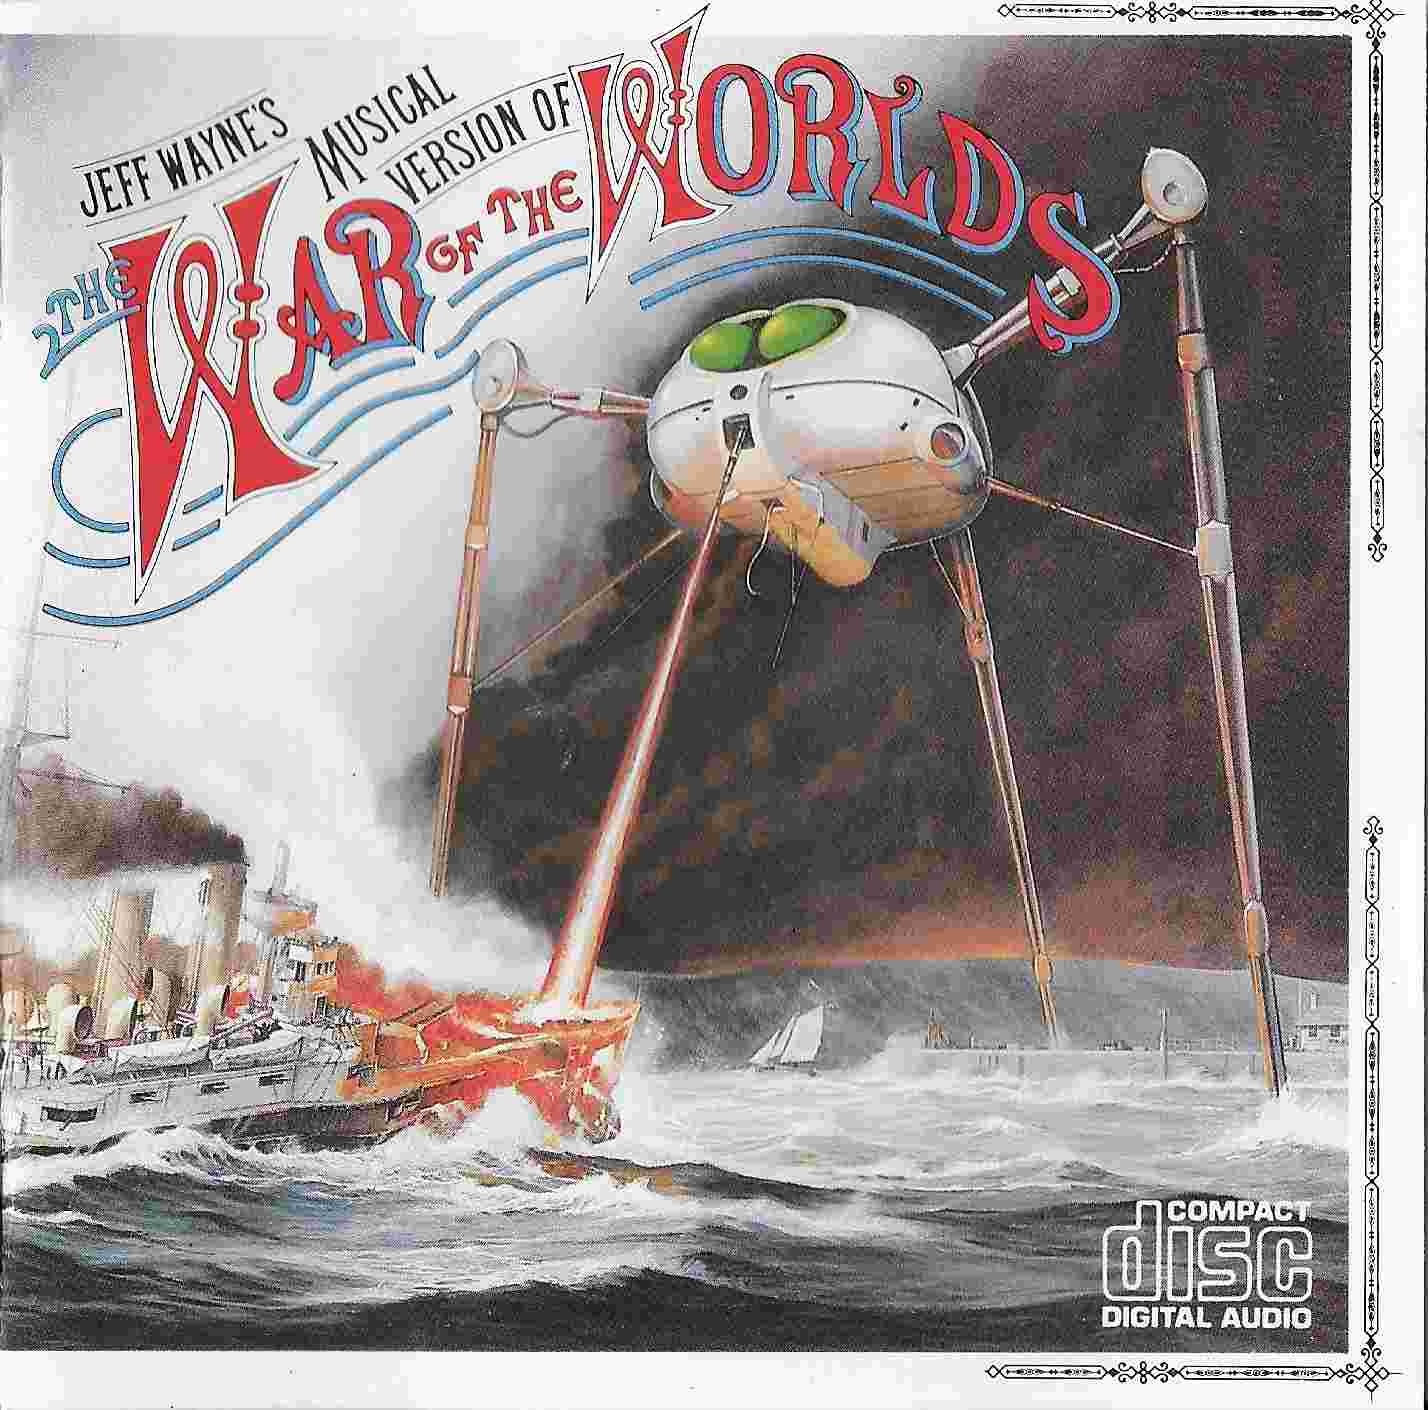 Picture of War of the Worlds by artist Jeff Wayne from ITV, Channel 4 and Channel 5 cds library